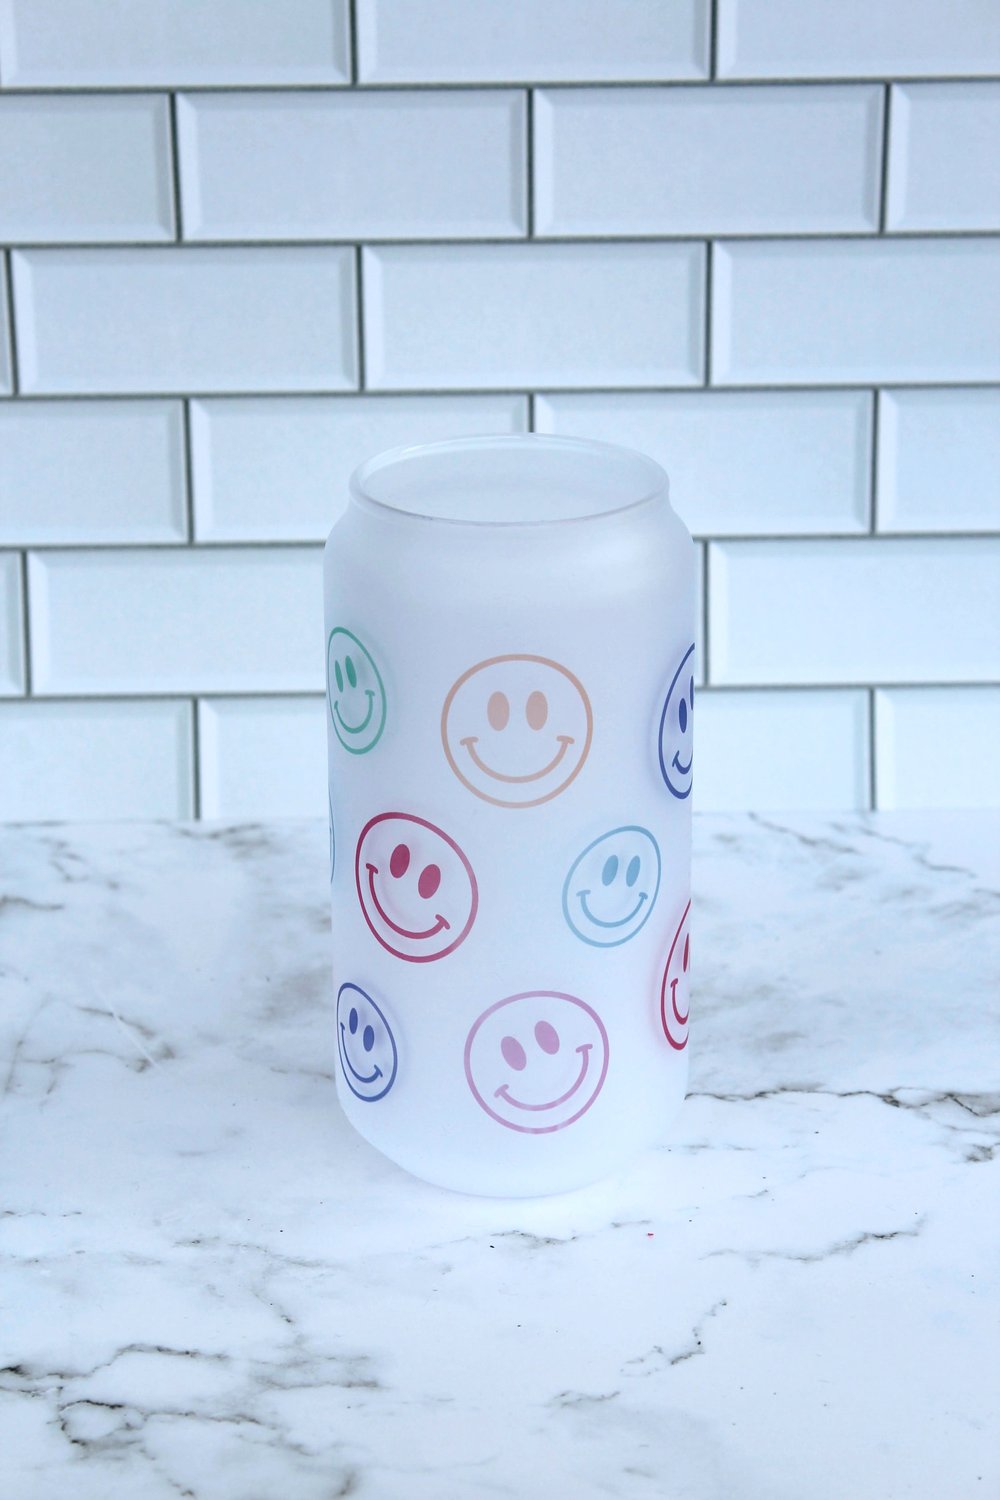 Melted Smiley Face Iced Coffee Glass Cup, Soda Can Glasses 16Oz